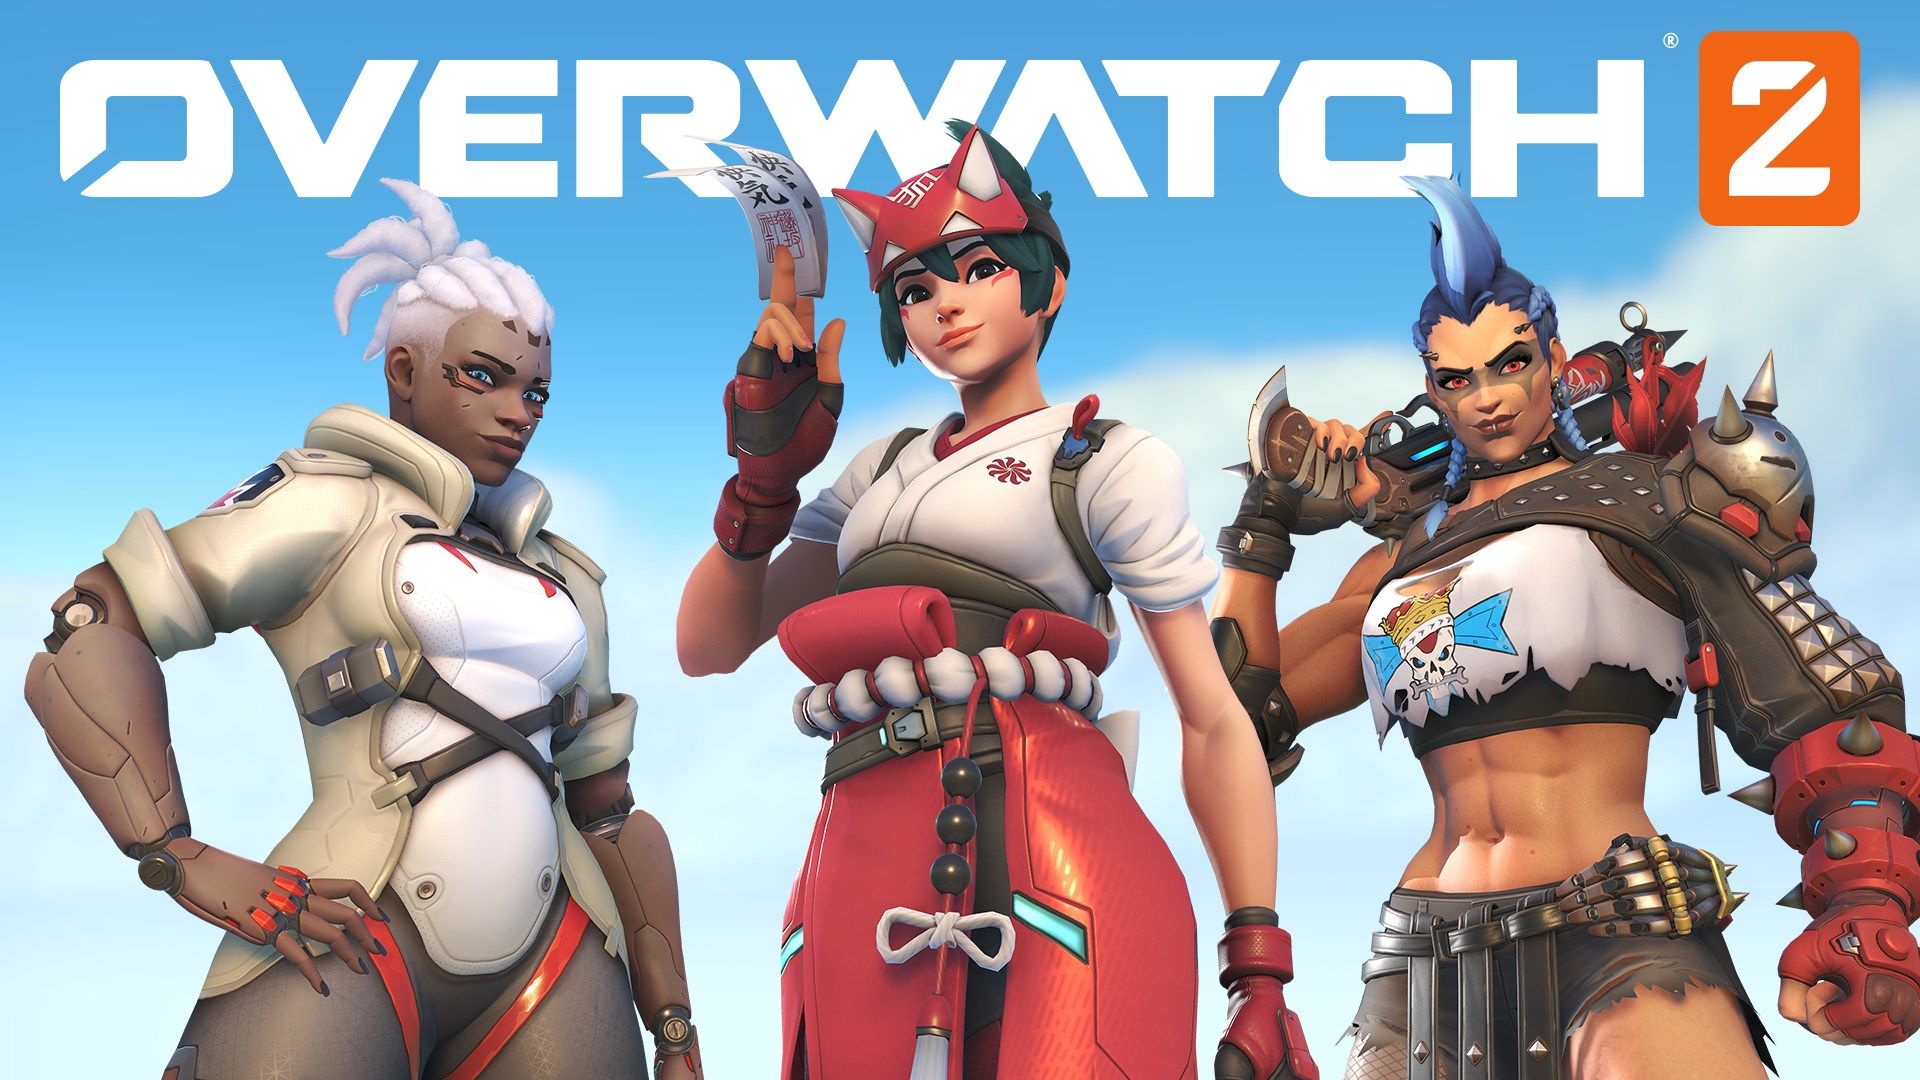 Overwatch 2 Canceled Hero Mode, Only To Turn Around And Sell PvE Campaigns For $15 Each